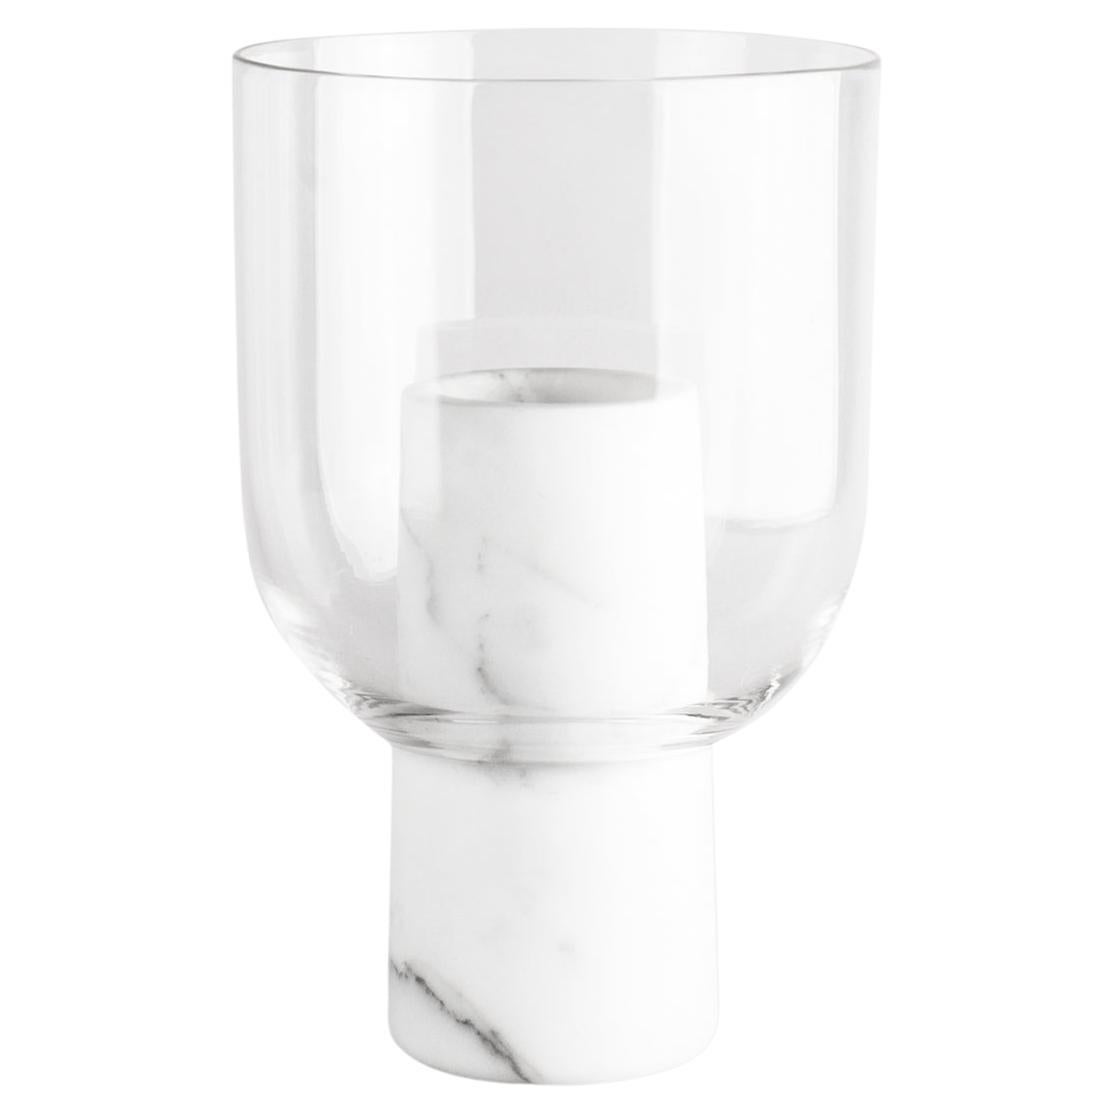 Statuario Marble and Hand Blown Glass, "Abito" Vase by Sandro Lopez White, Italy For Sale